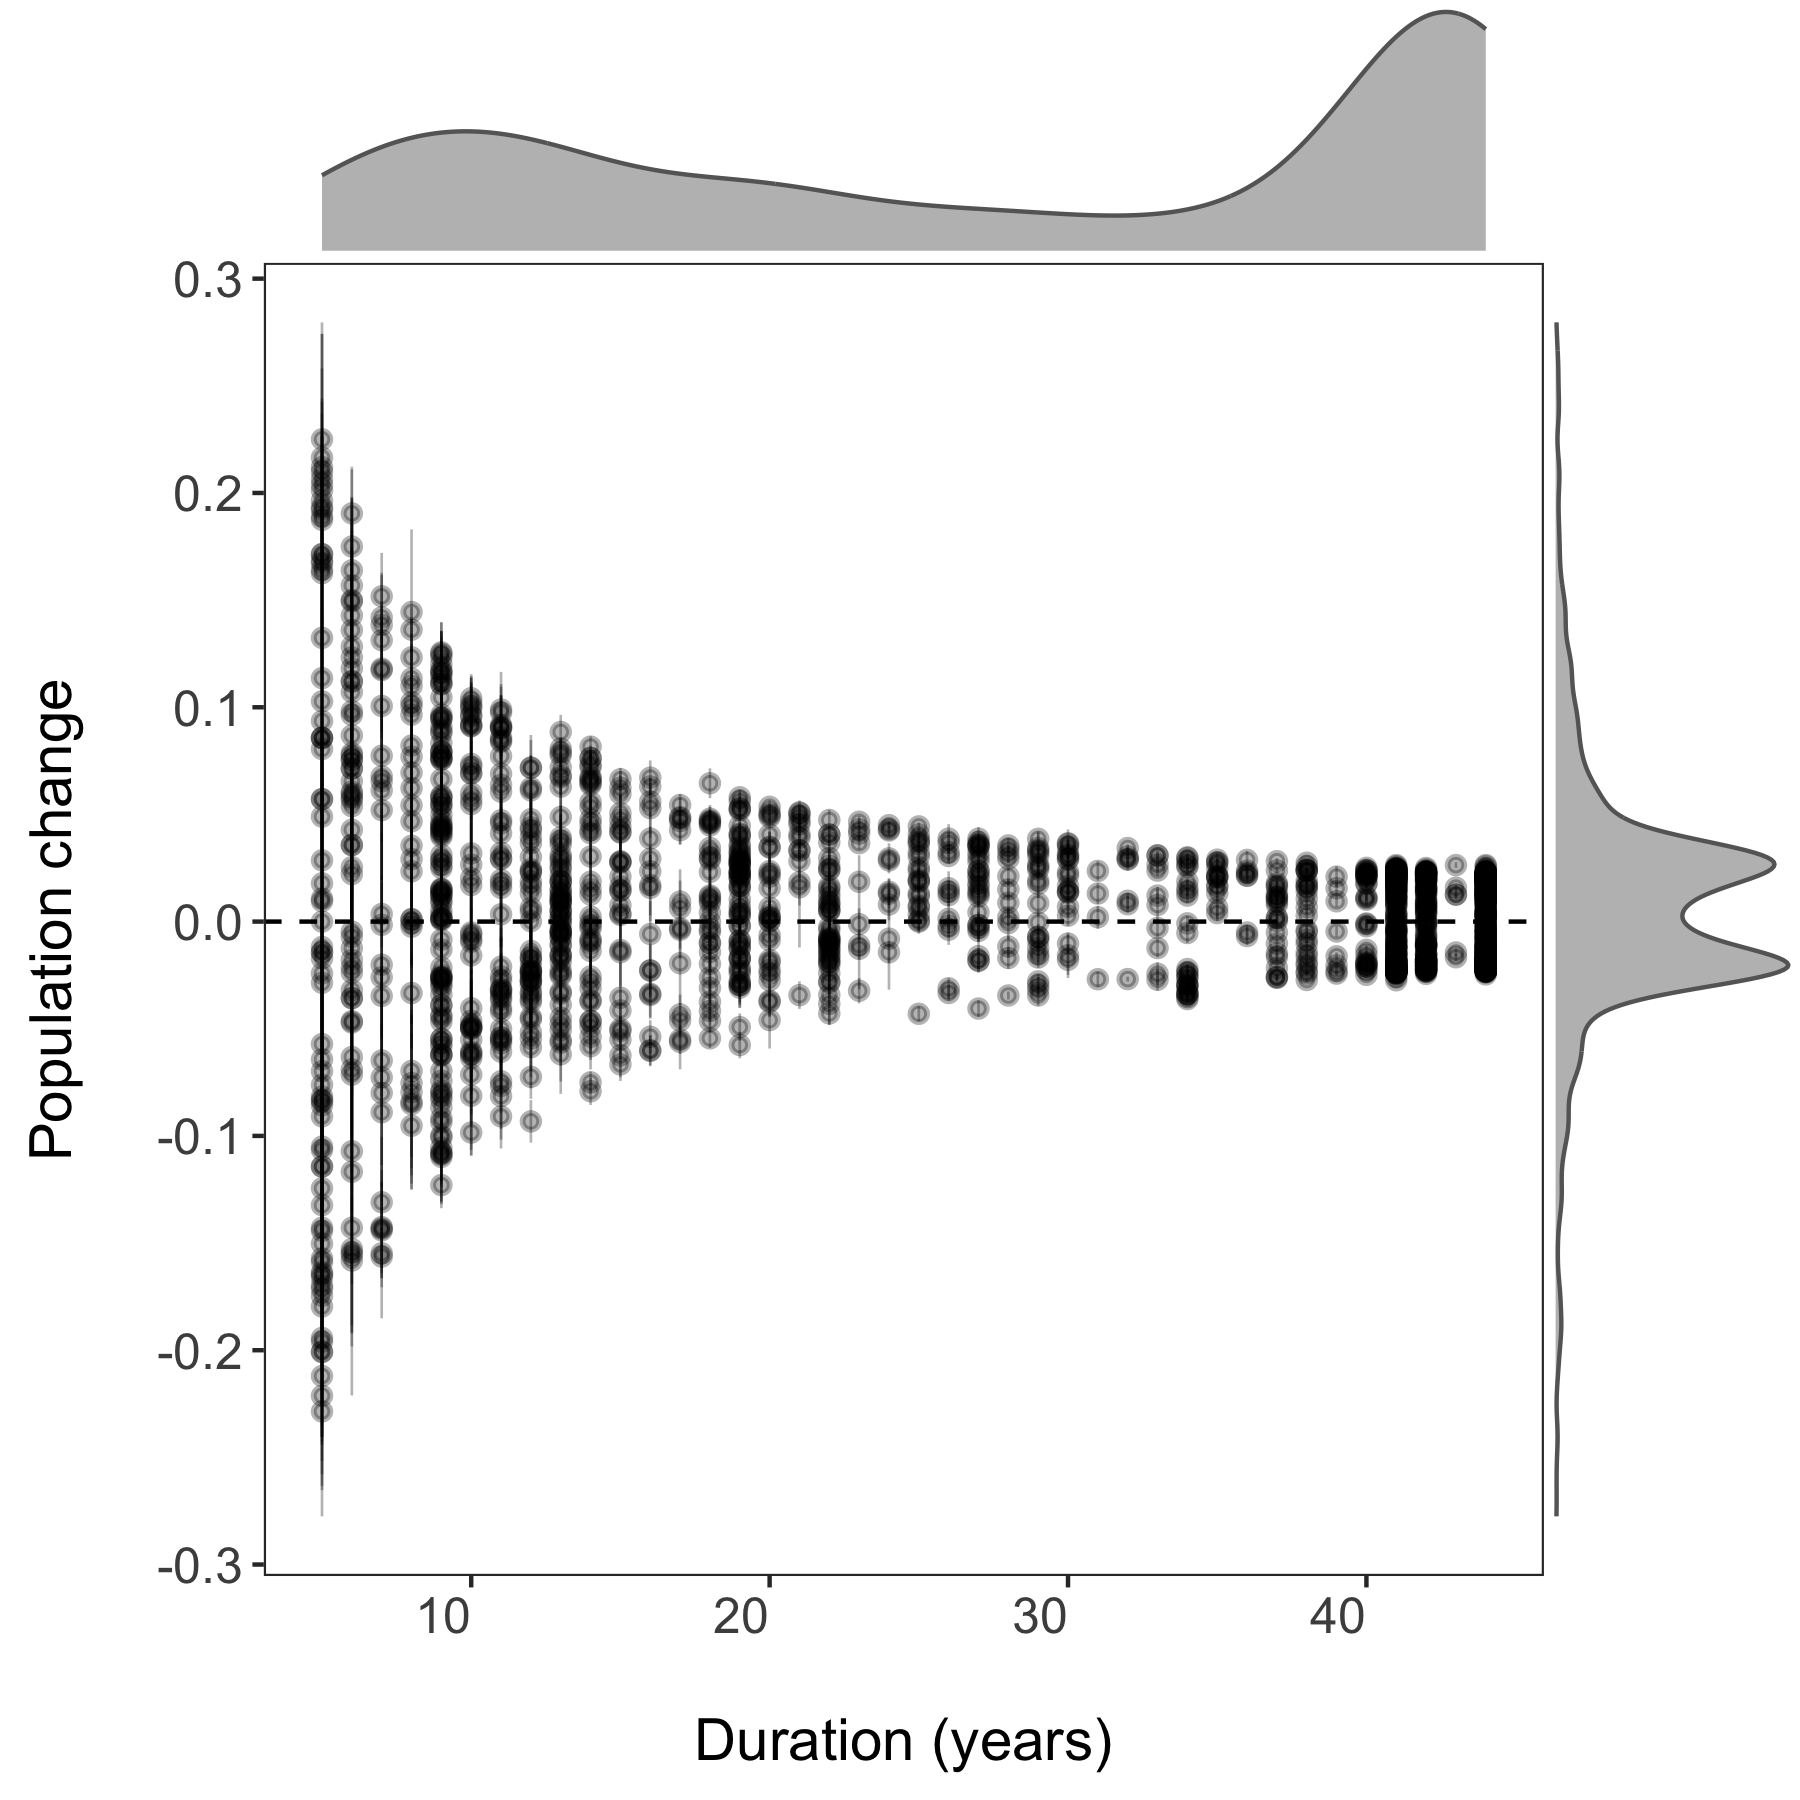 Population change and duration of study with marginal density plots